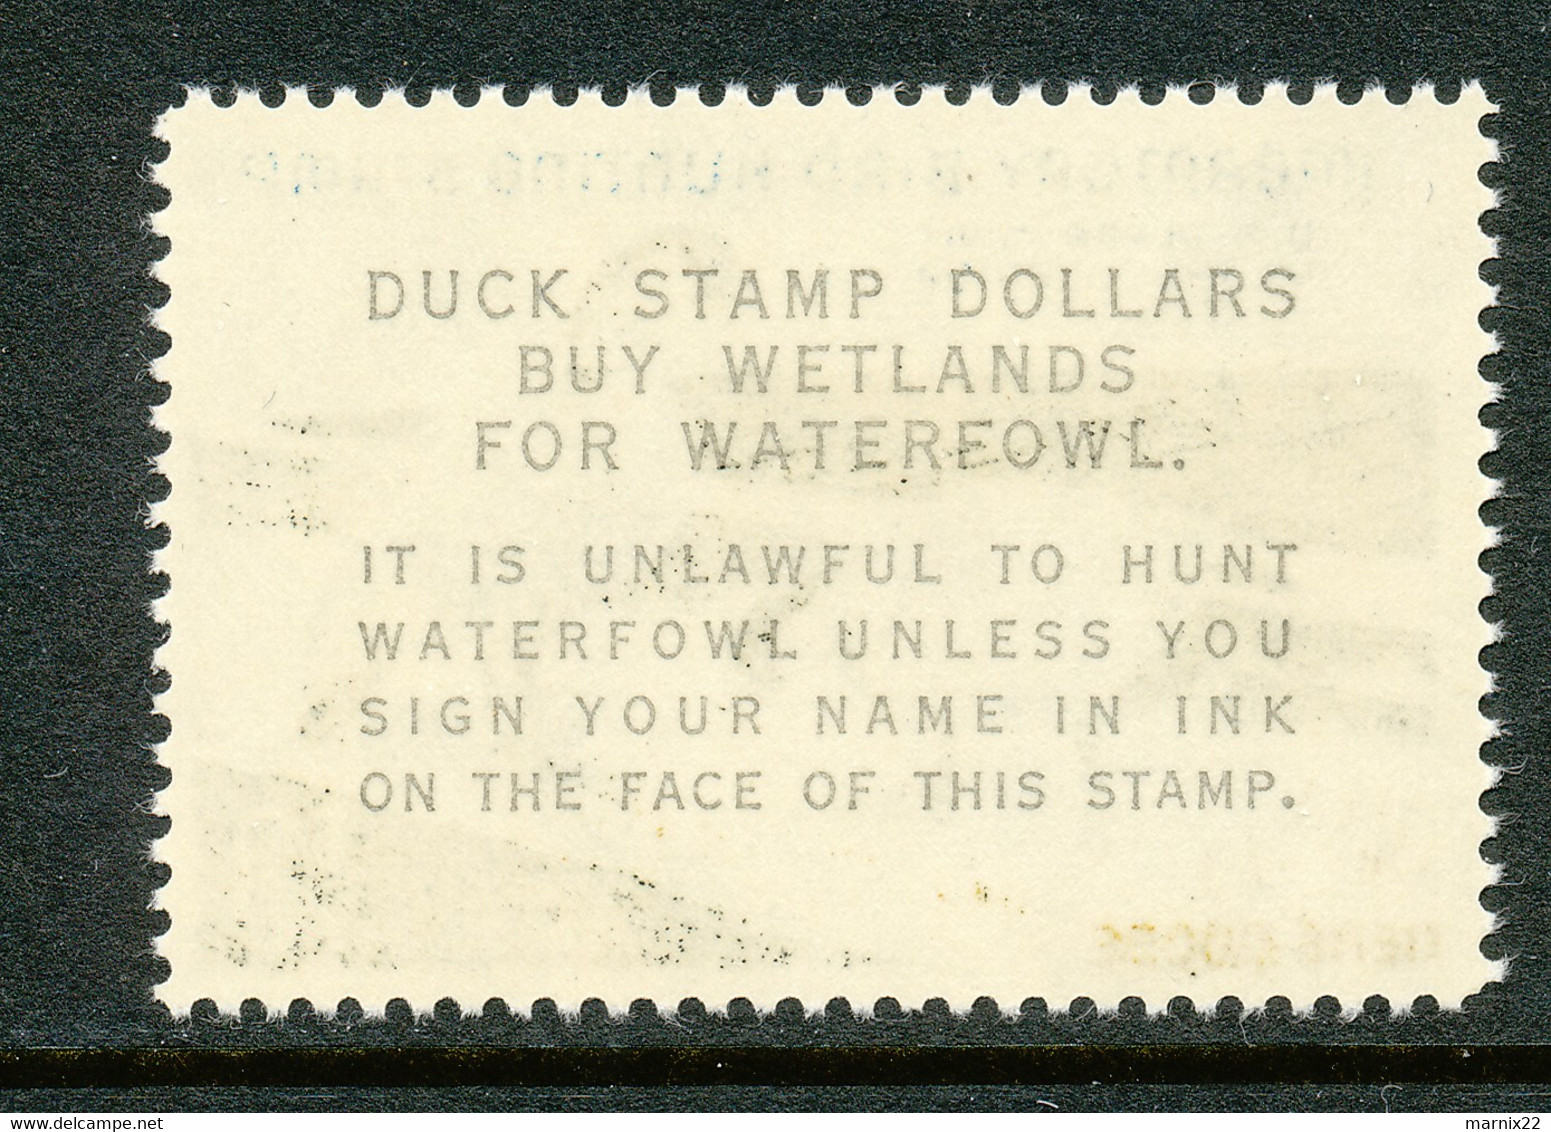 HUNTING PERMIT STAMP - DUCKSTAMP 1964 - MNH - (RW31) - Duck Stamps